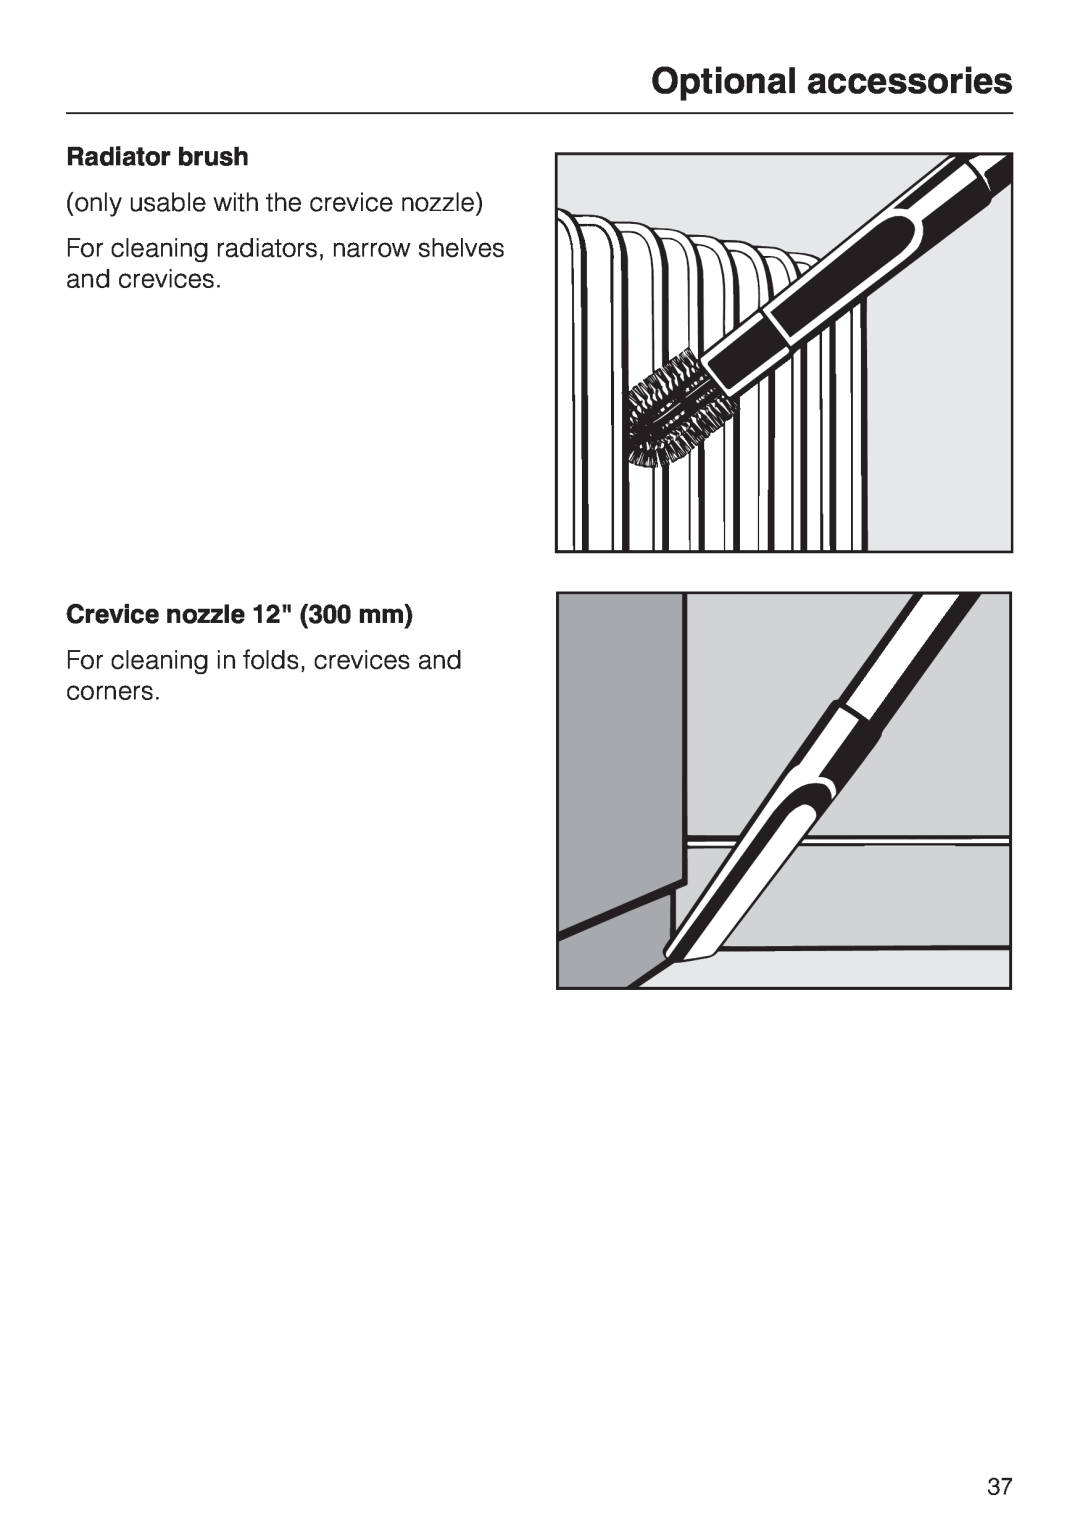 Miele S5981 Radiator brush, Crevice nozzle 12 300 mm, Optional accessories, only usable with the crevice nozzle 